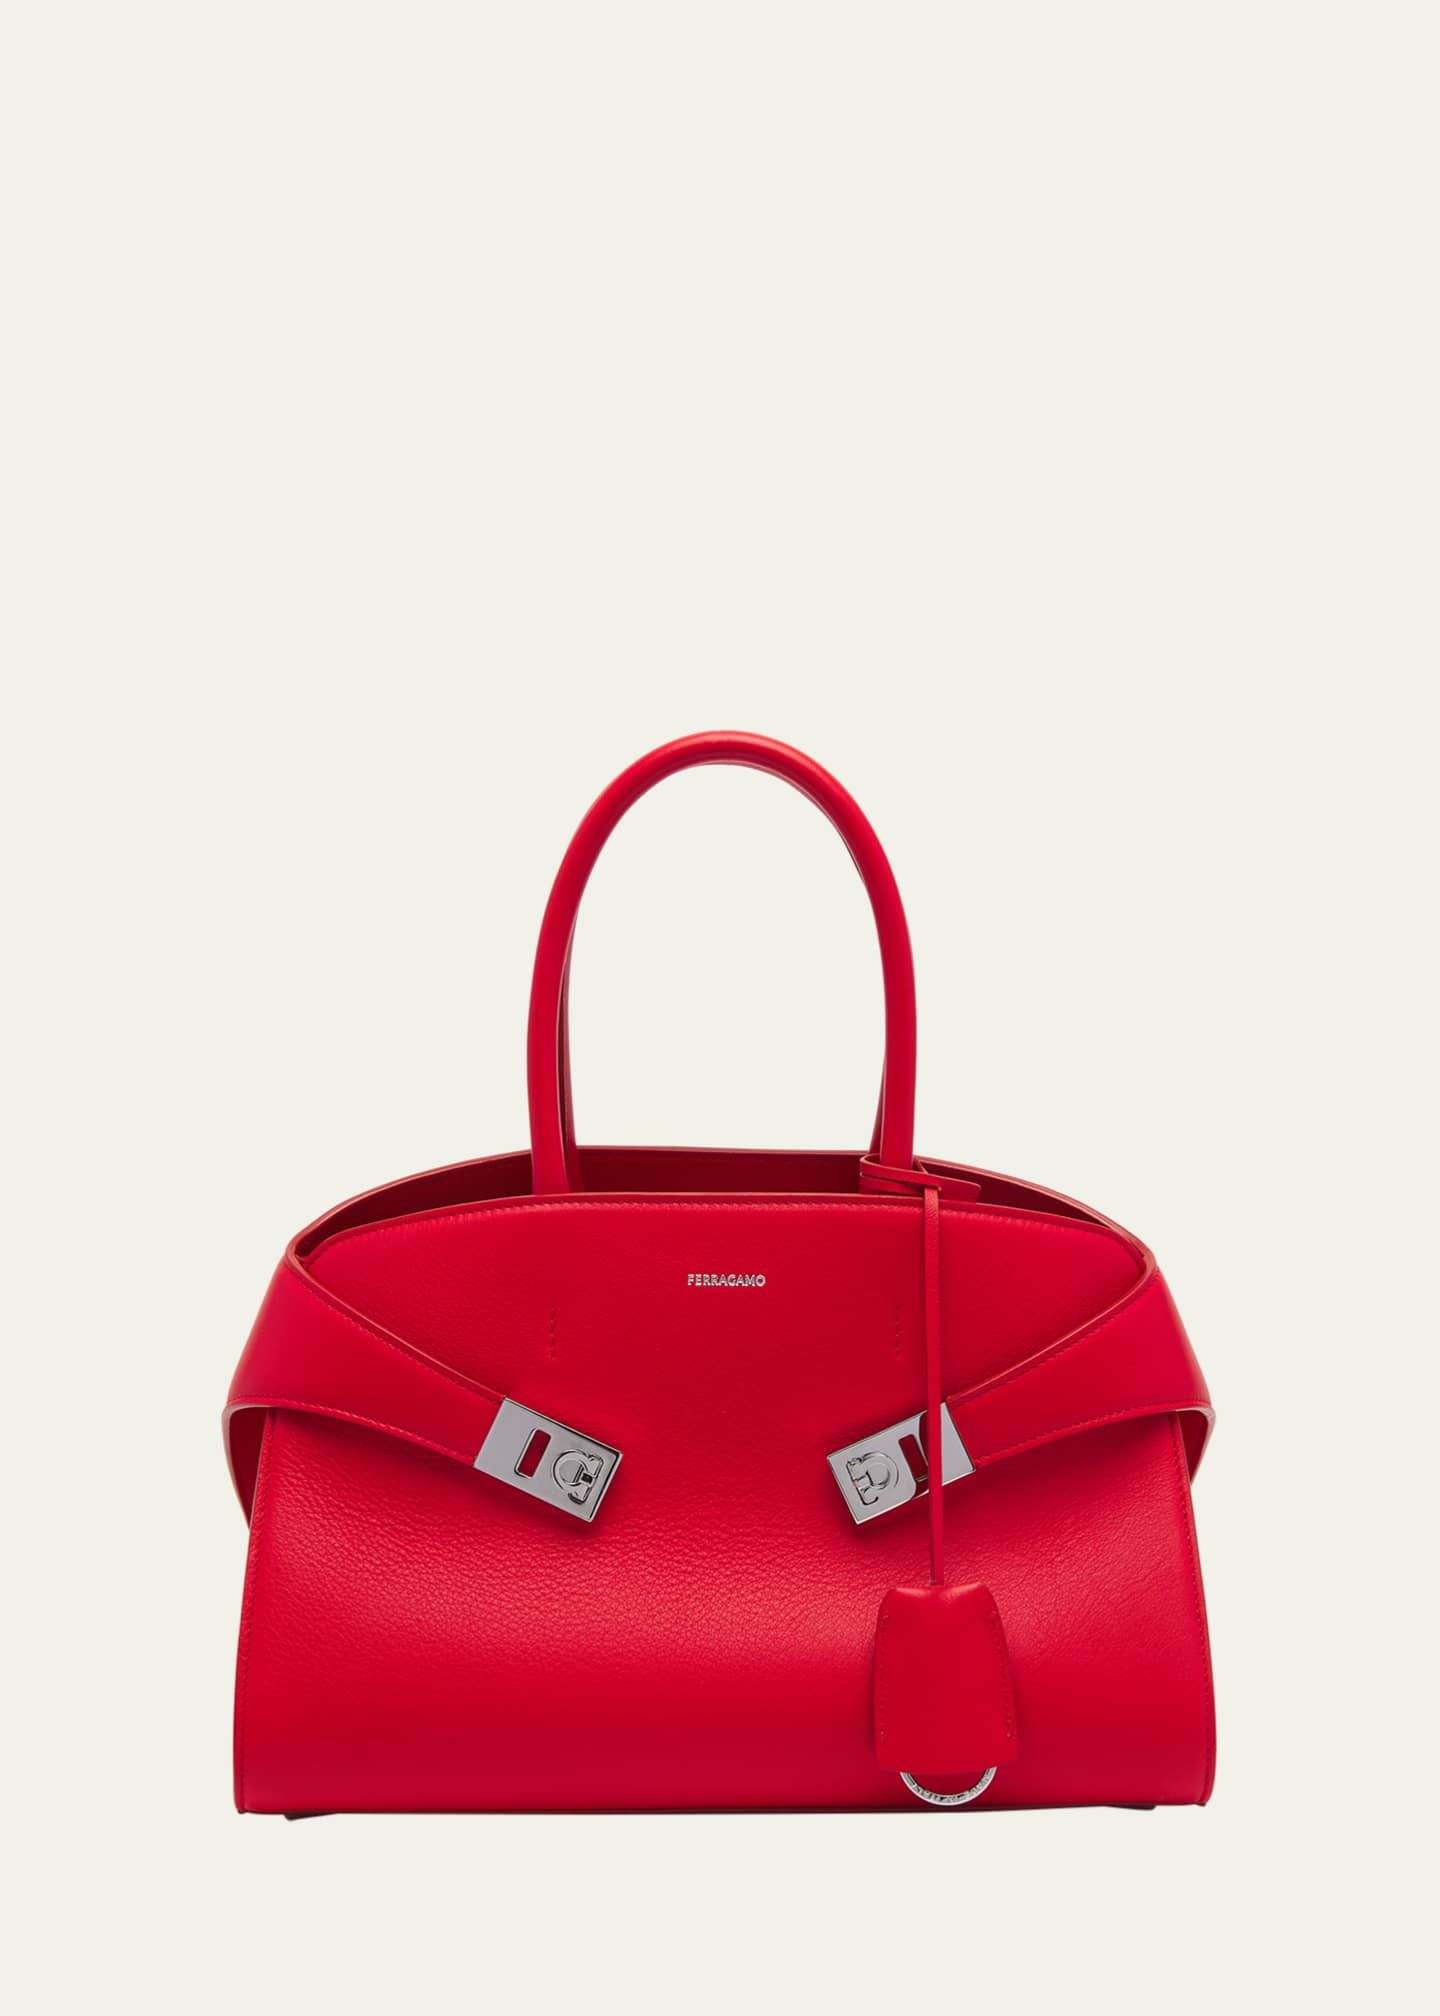 10 Handbags With Initial Logo Clasps You Have To Get Your Hands On